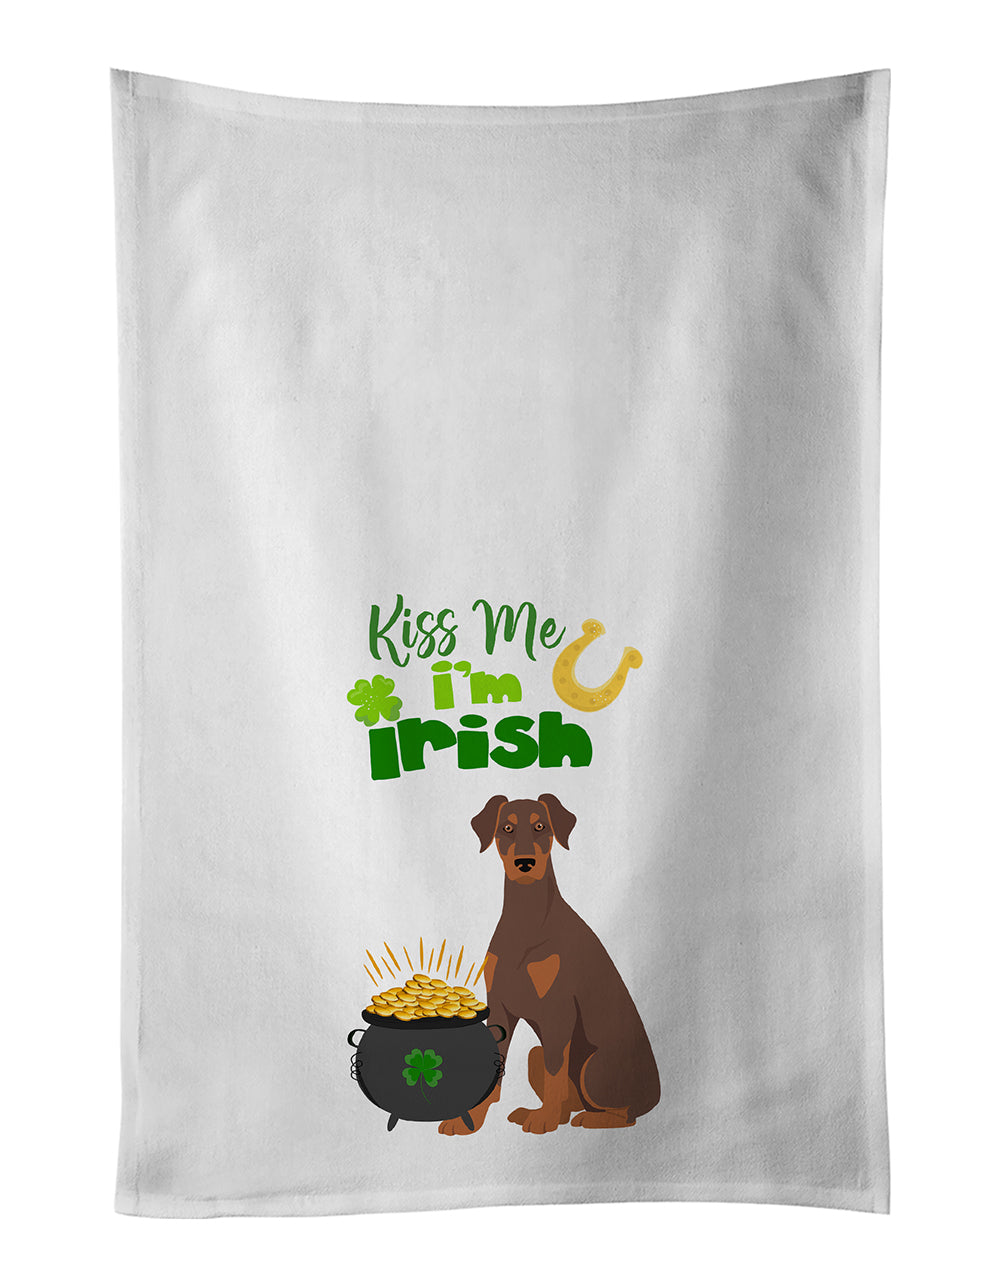 Buy this Natural Ear Red and Tan Doberman Pinscher St. Patrick's Day White Kitchen Towel Set of 2 Dish Towels